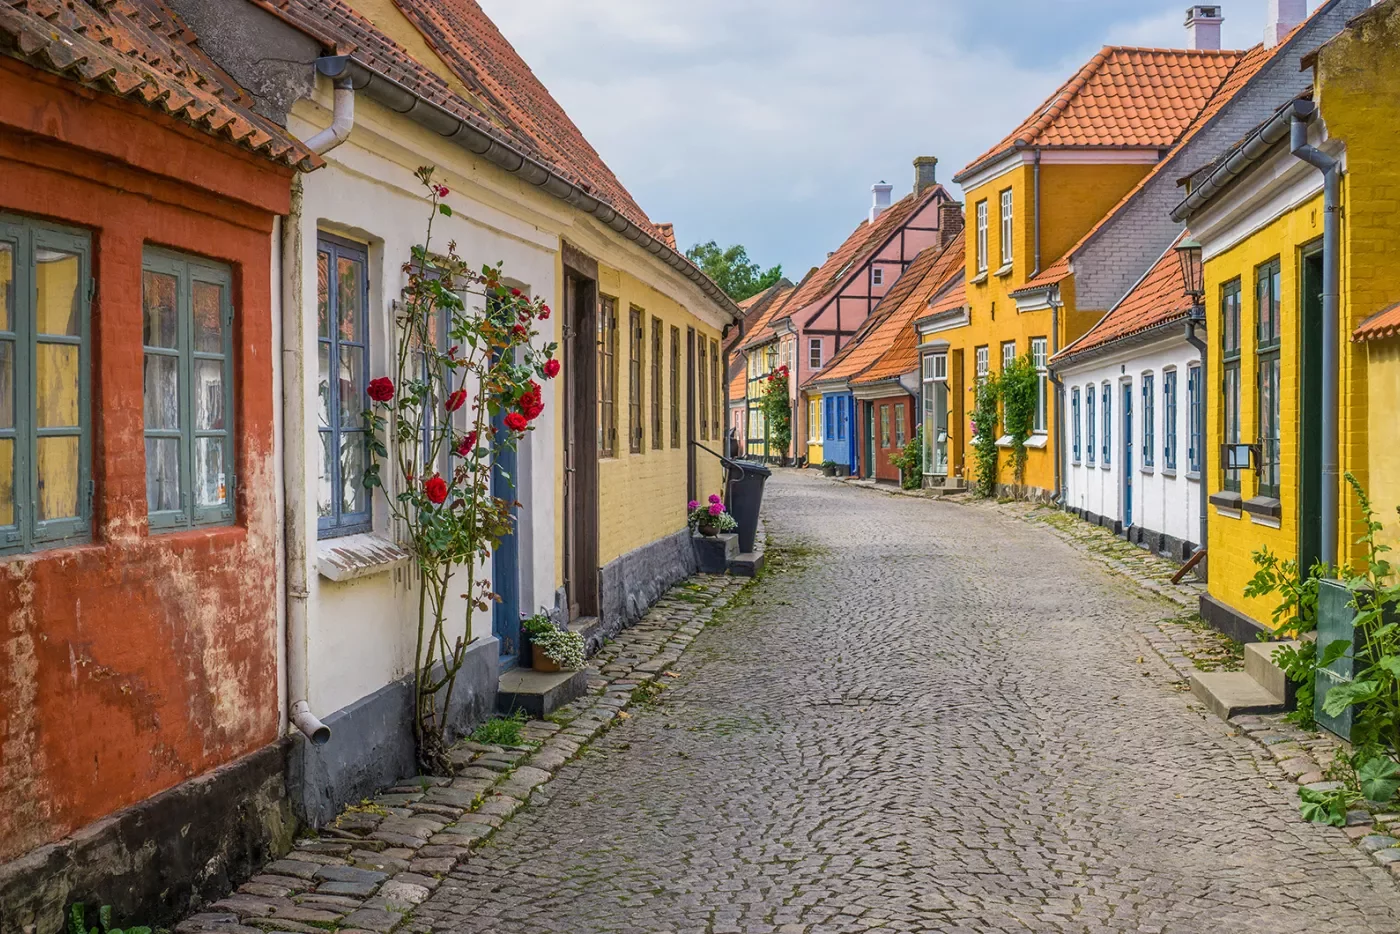 Local village street with colorful cottages